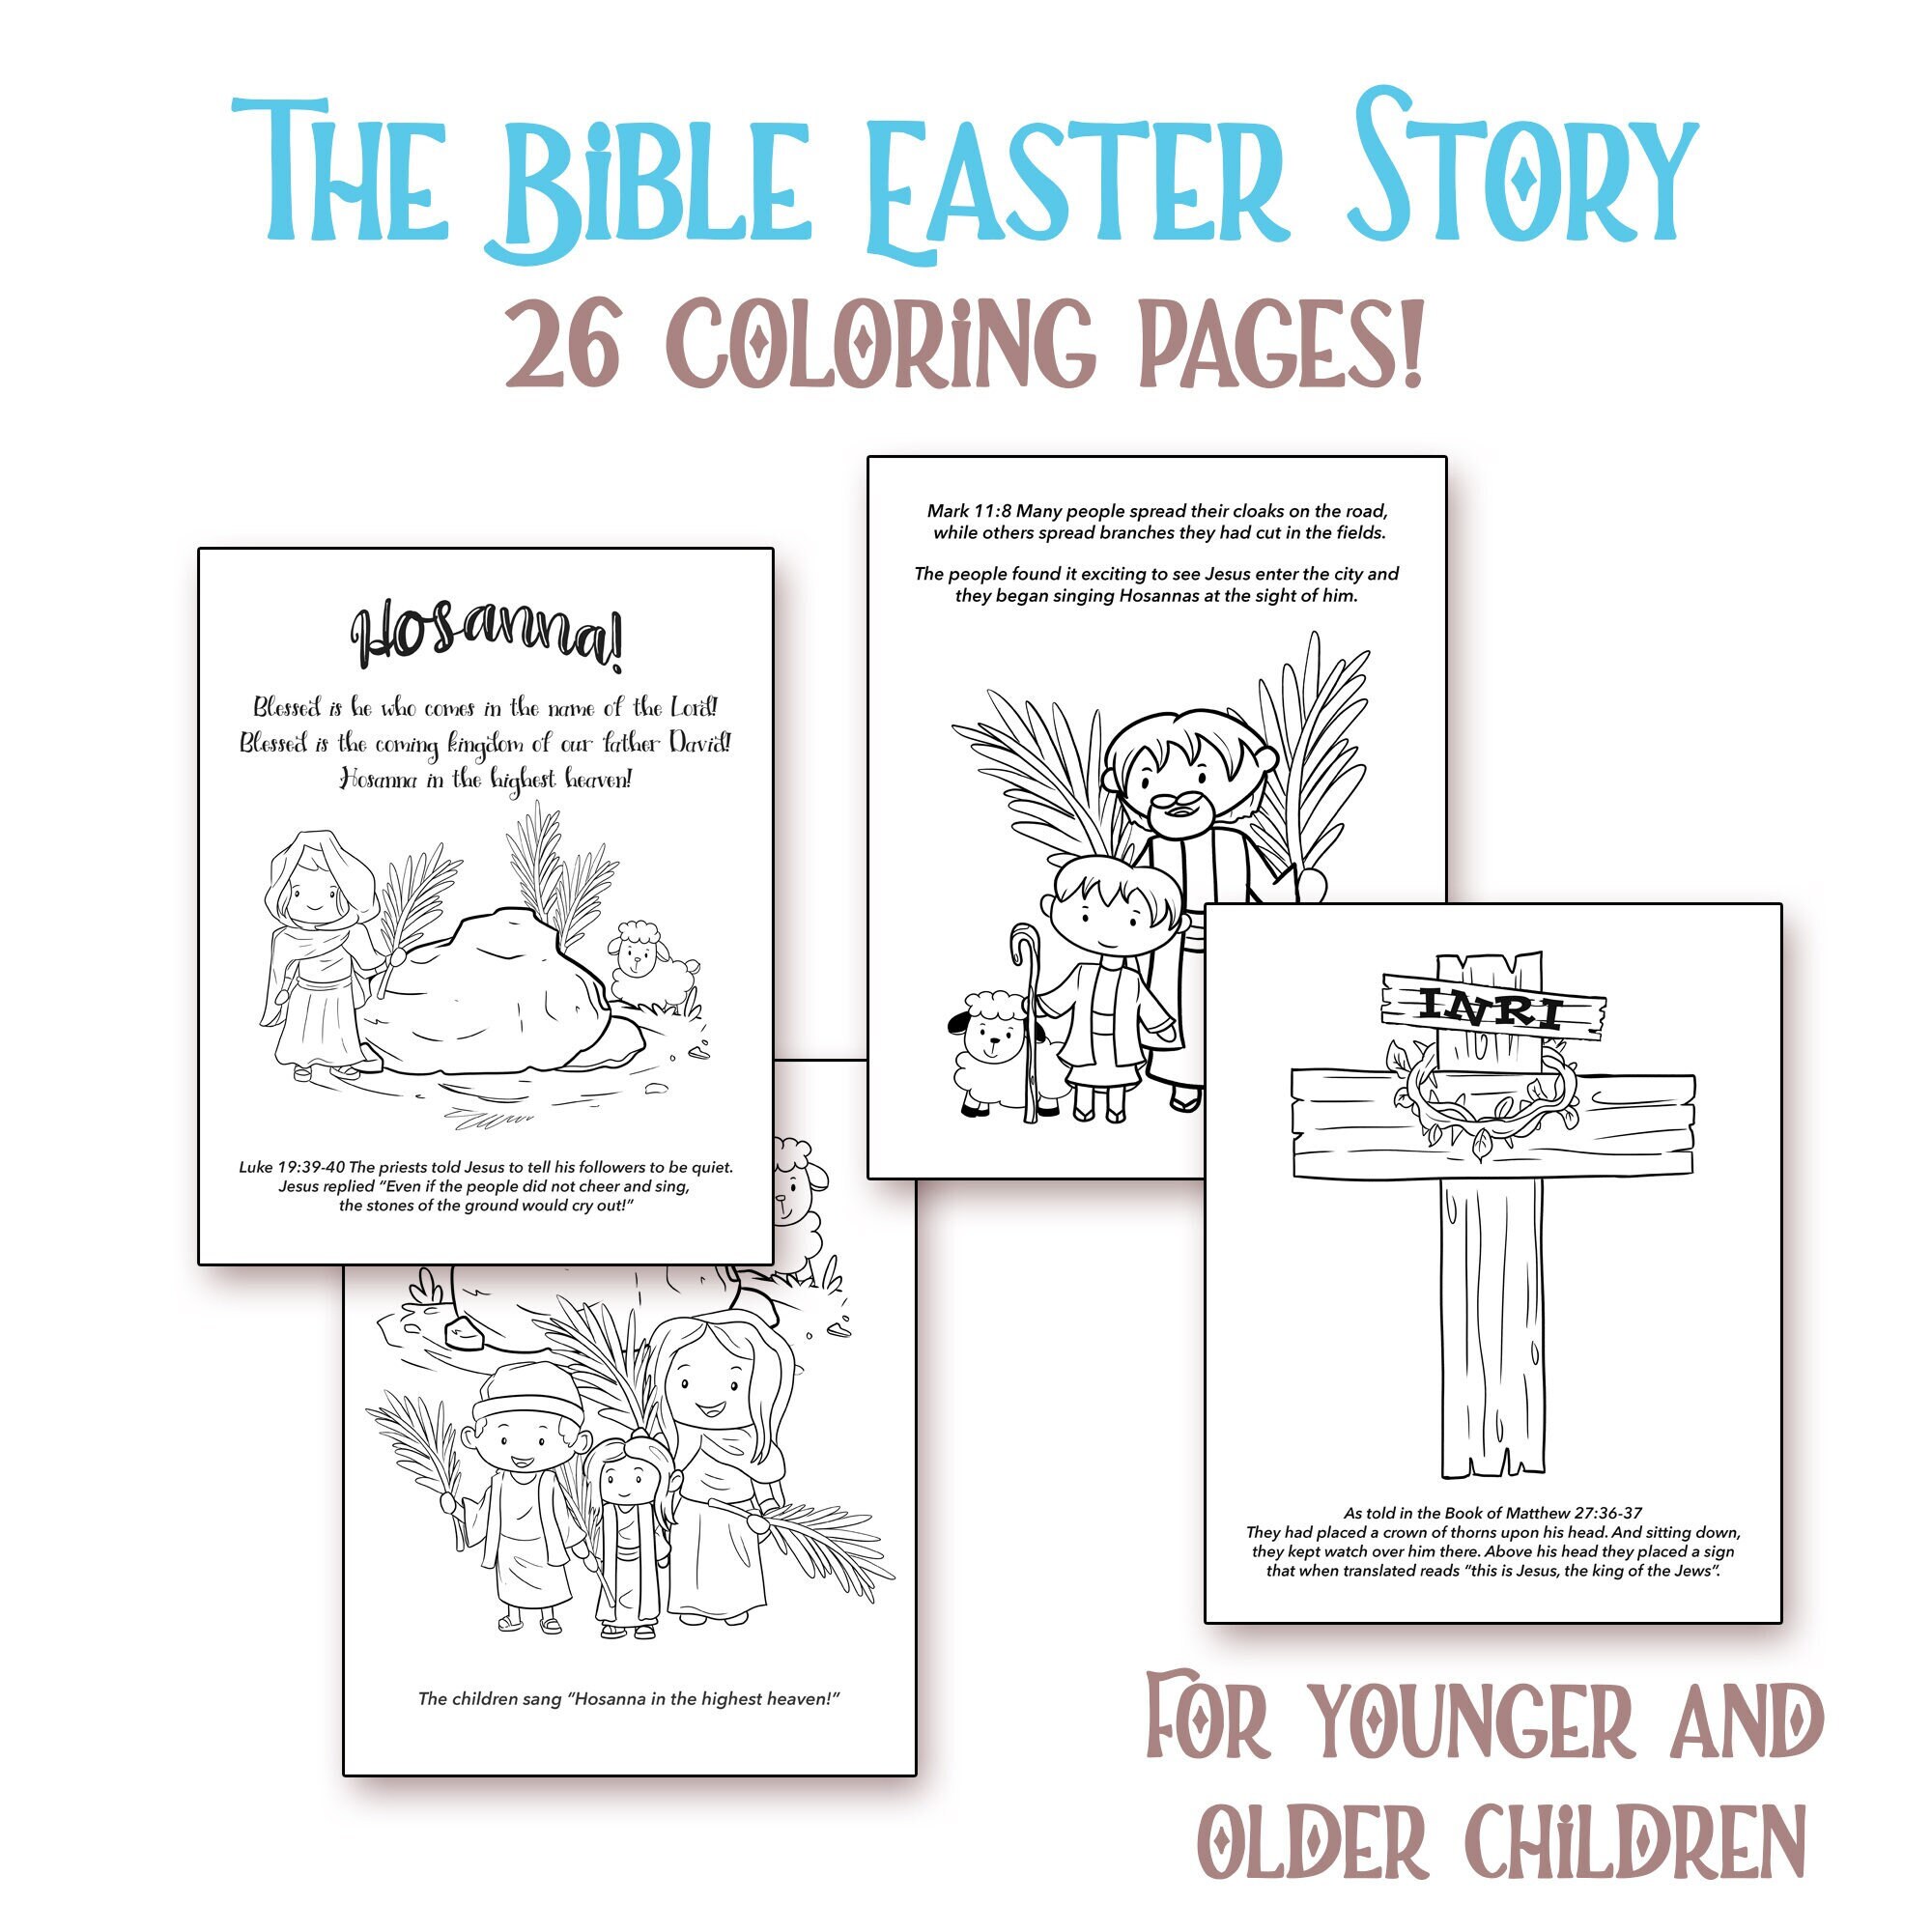 Easter story coloring pages palm sunday and easter scripture activity holy week pages kids all ages home or sunday school activity